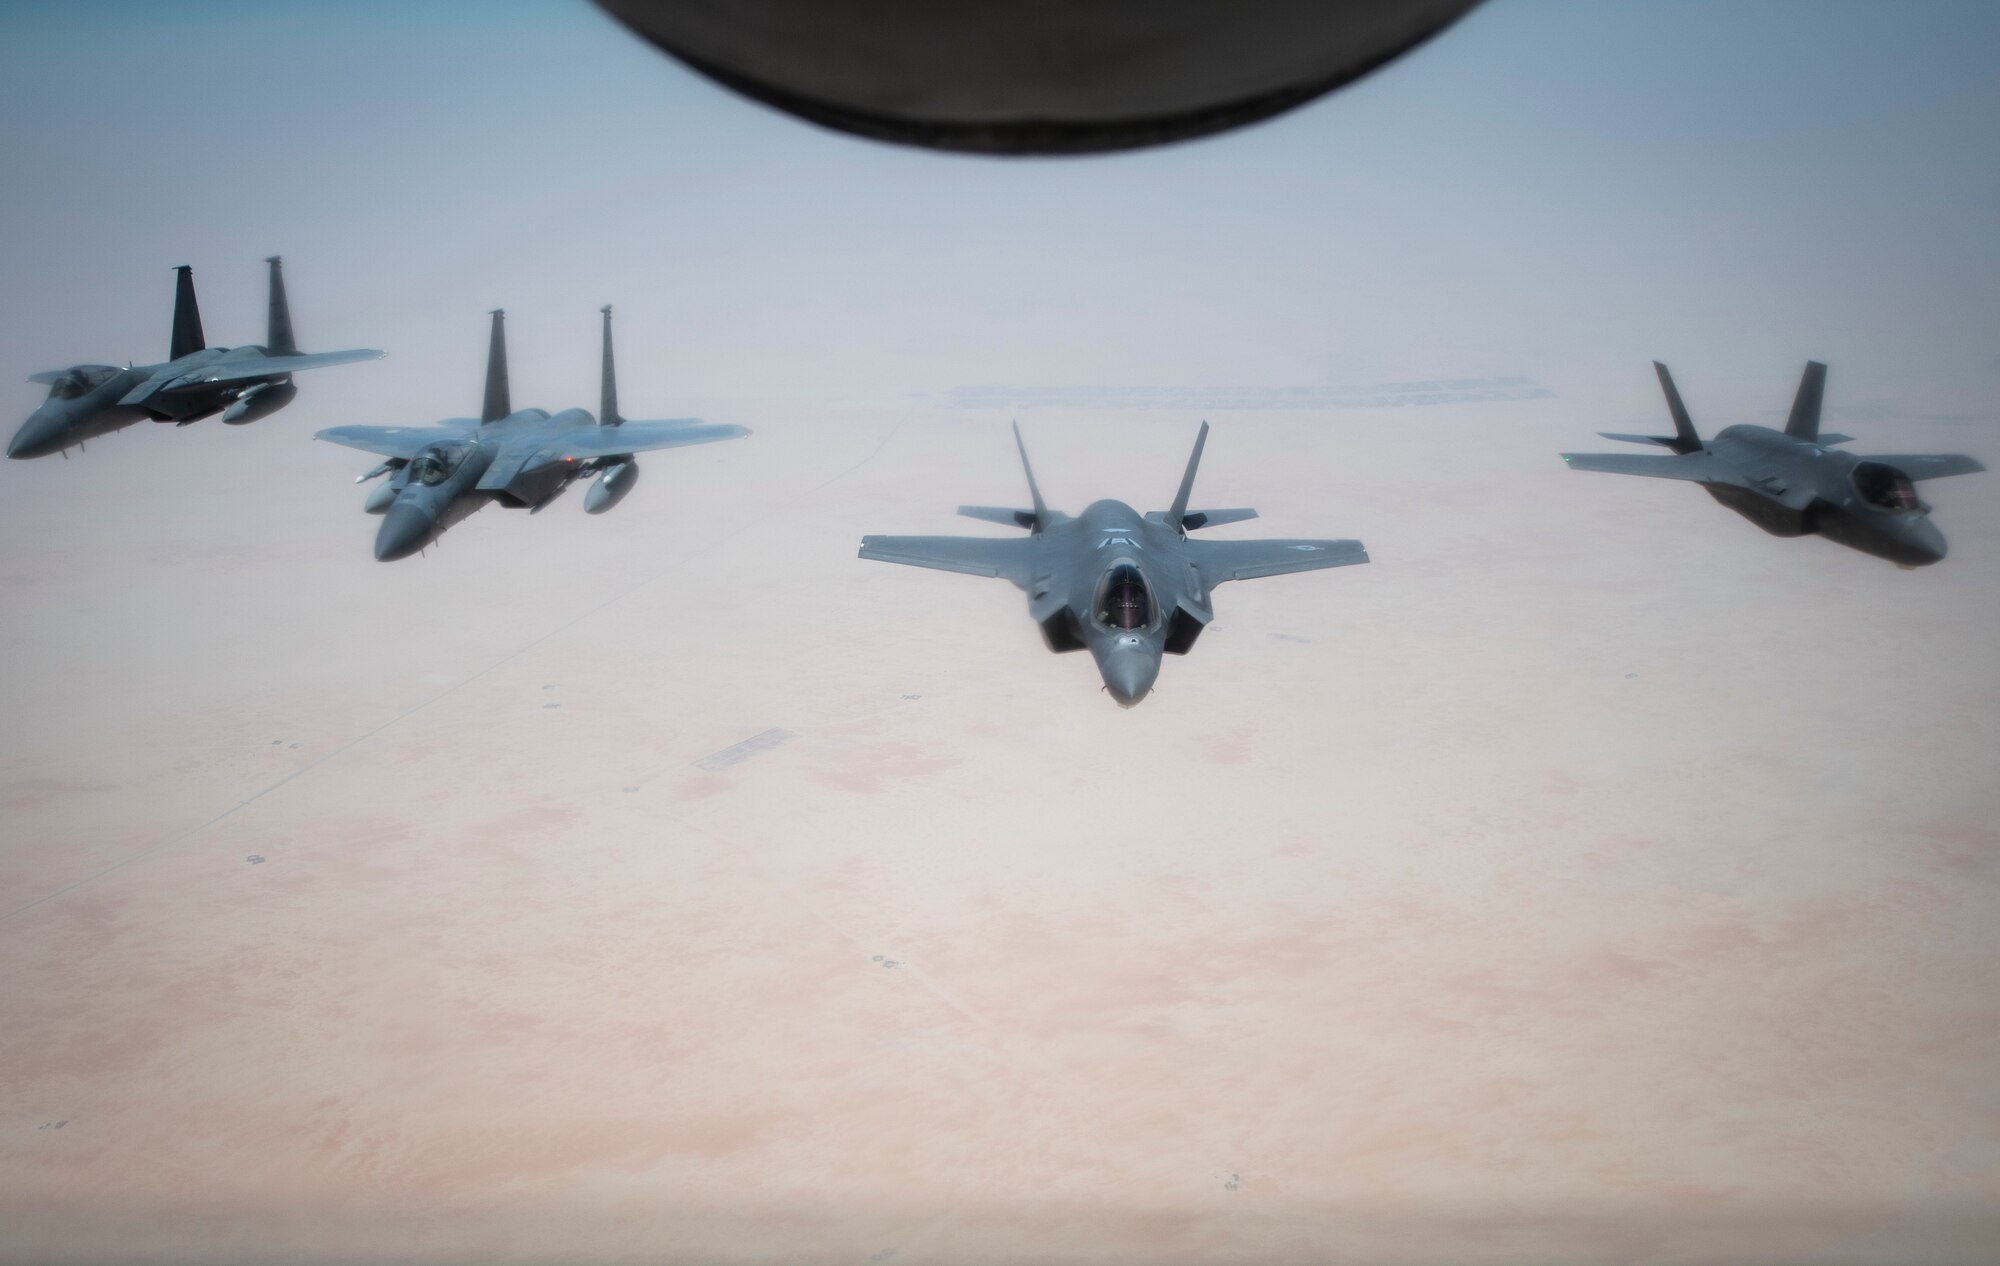 A formation of U.S. Air Forces Central Command F-15C Eagles and F-35A Lightning IIs fly behind a U.S. Air Force KC-135 Stratotanker during air refueling over Southwest Asia, July 25, 2020. Through joint exercises or direct operations, the 380th Air Expeditionary Wing continues to strengthen relationships with regional and coalition partners to defend the region. (U.S. Air Force photo by Master Sgt. Larry E. Reid Jr.)